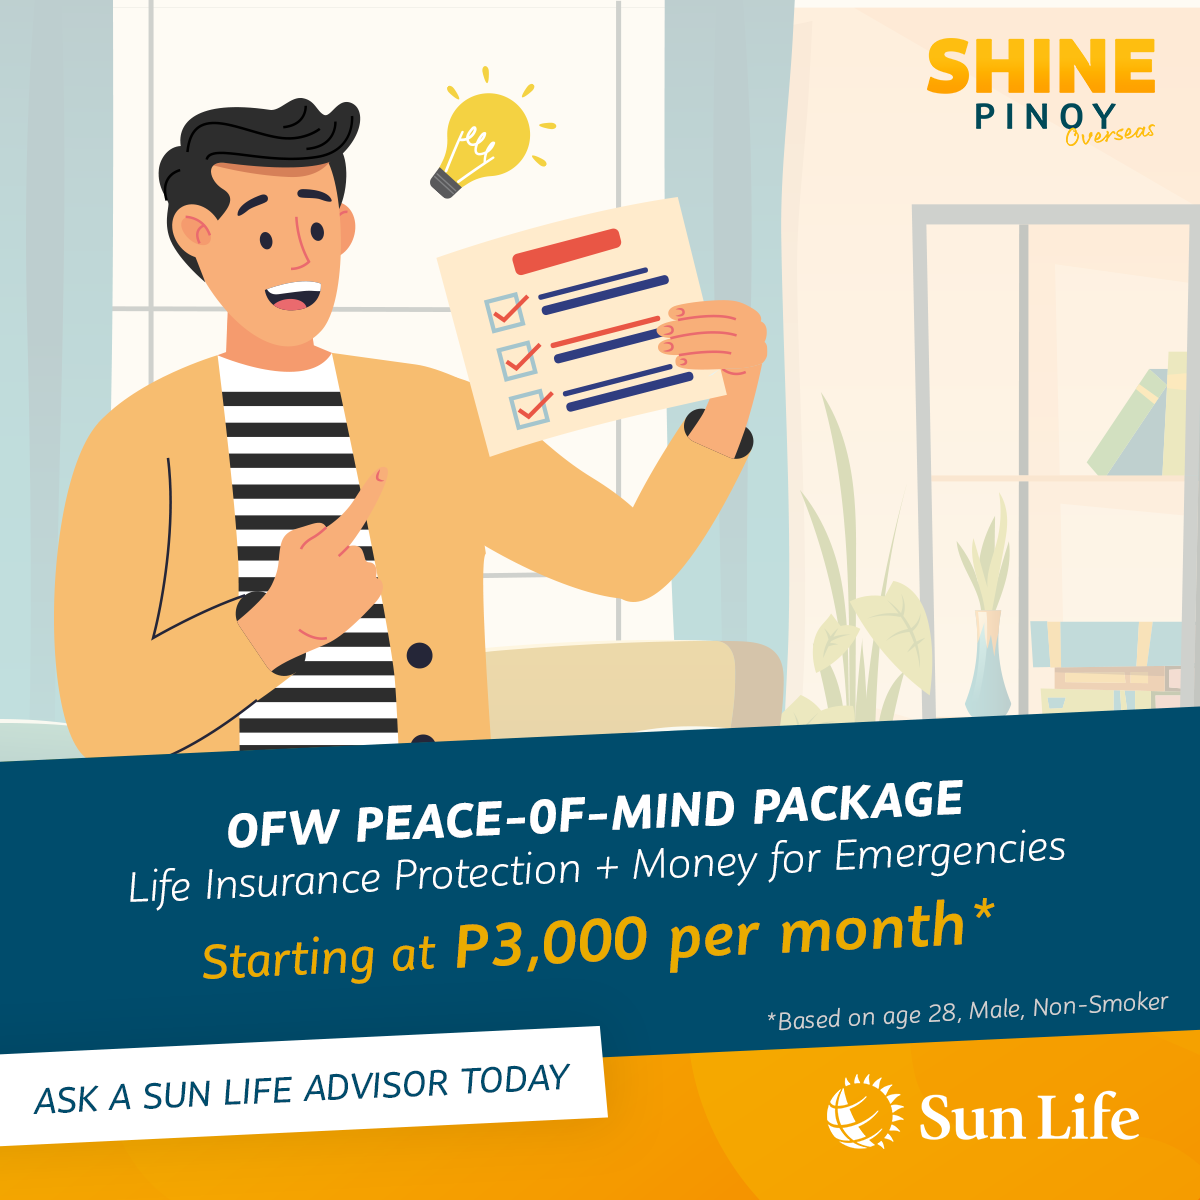 Sun Life Peace of Mind Package | Shine Pinoy OFW Financial Plan